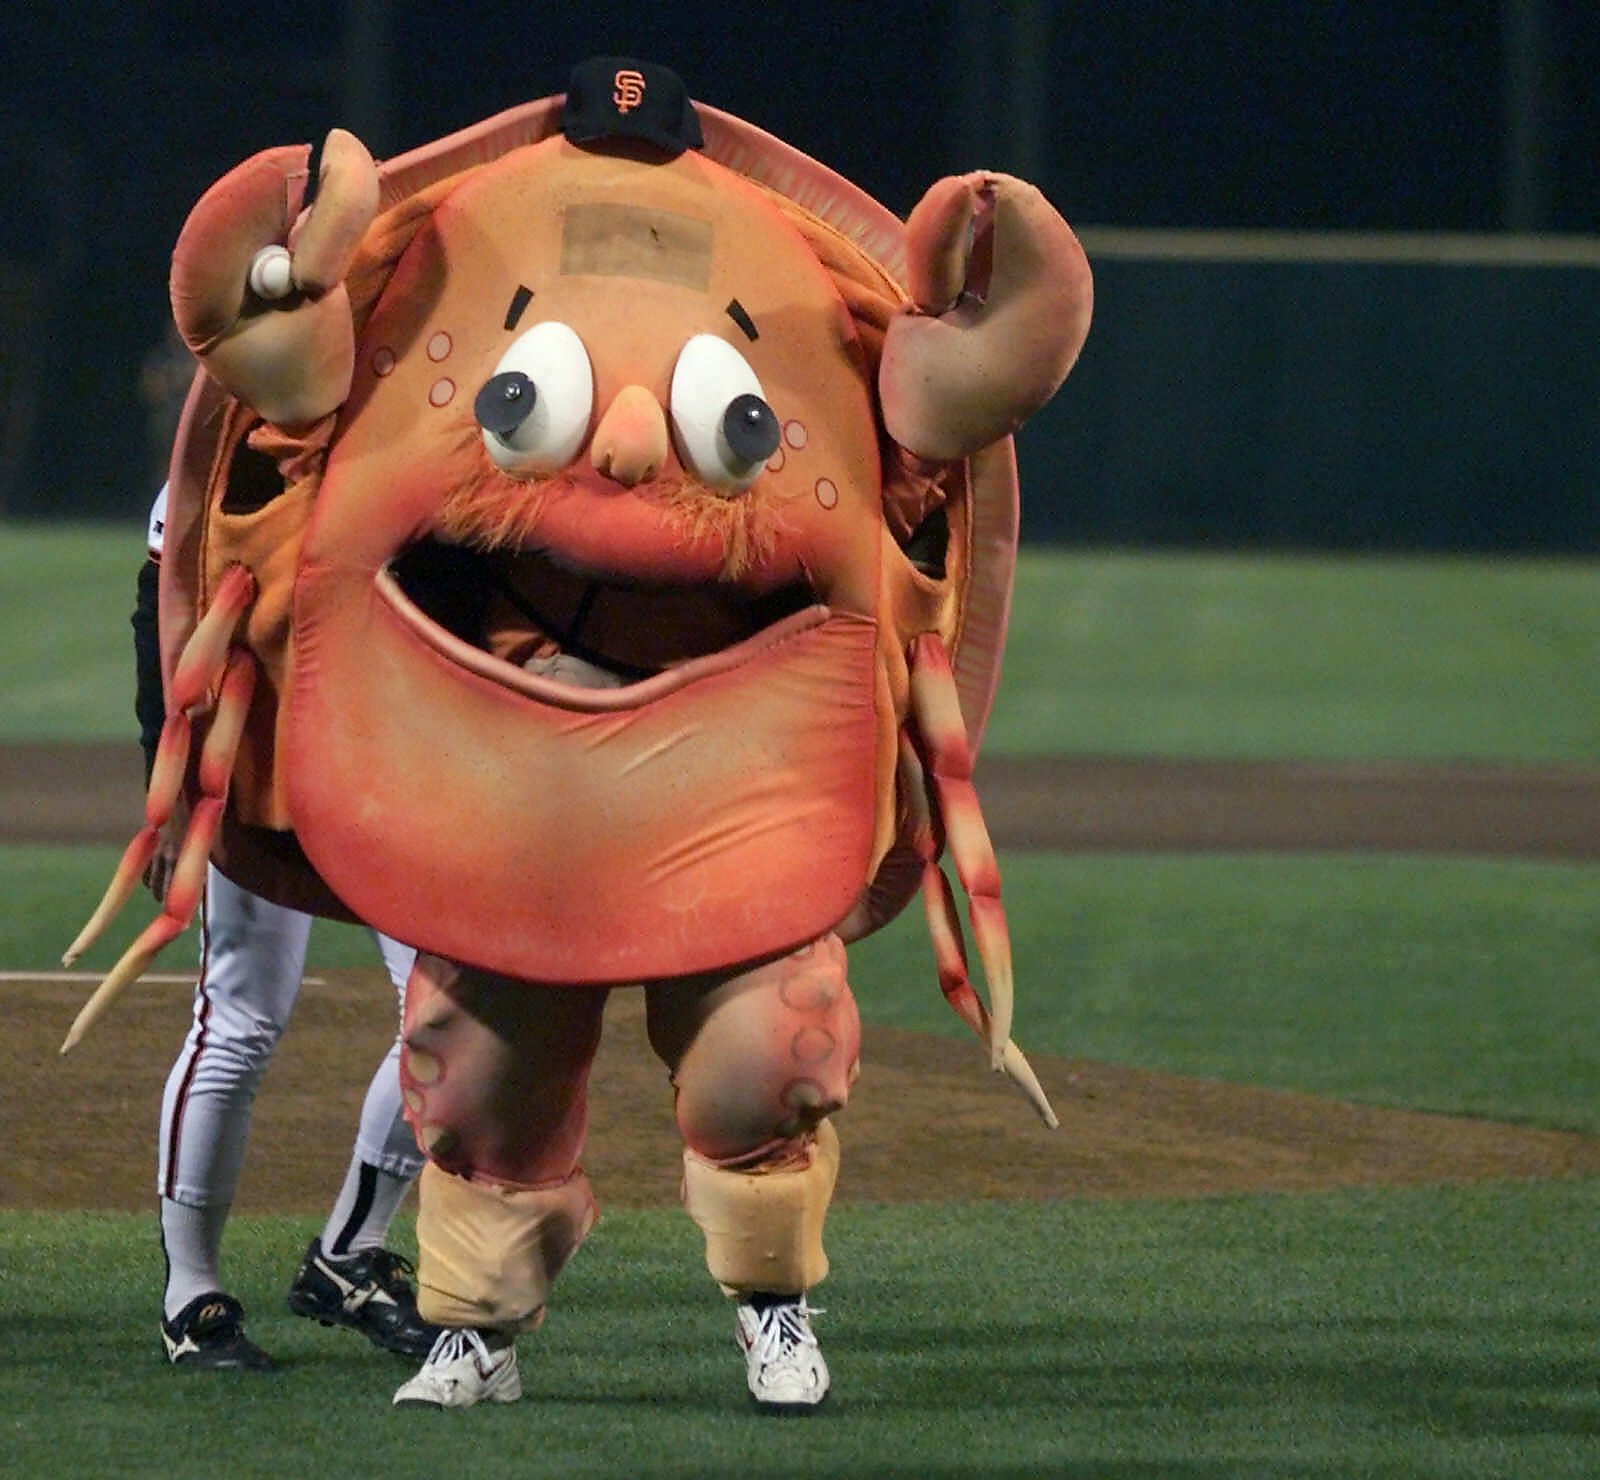 SF Giants on NBCS on X: Crazy Crab is the greatest mascot in